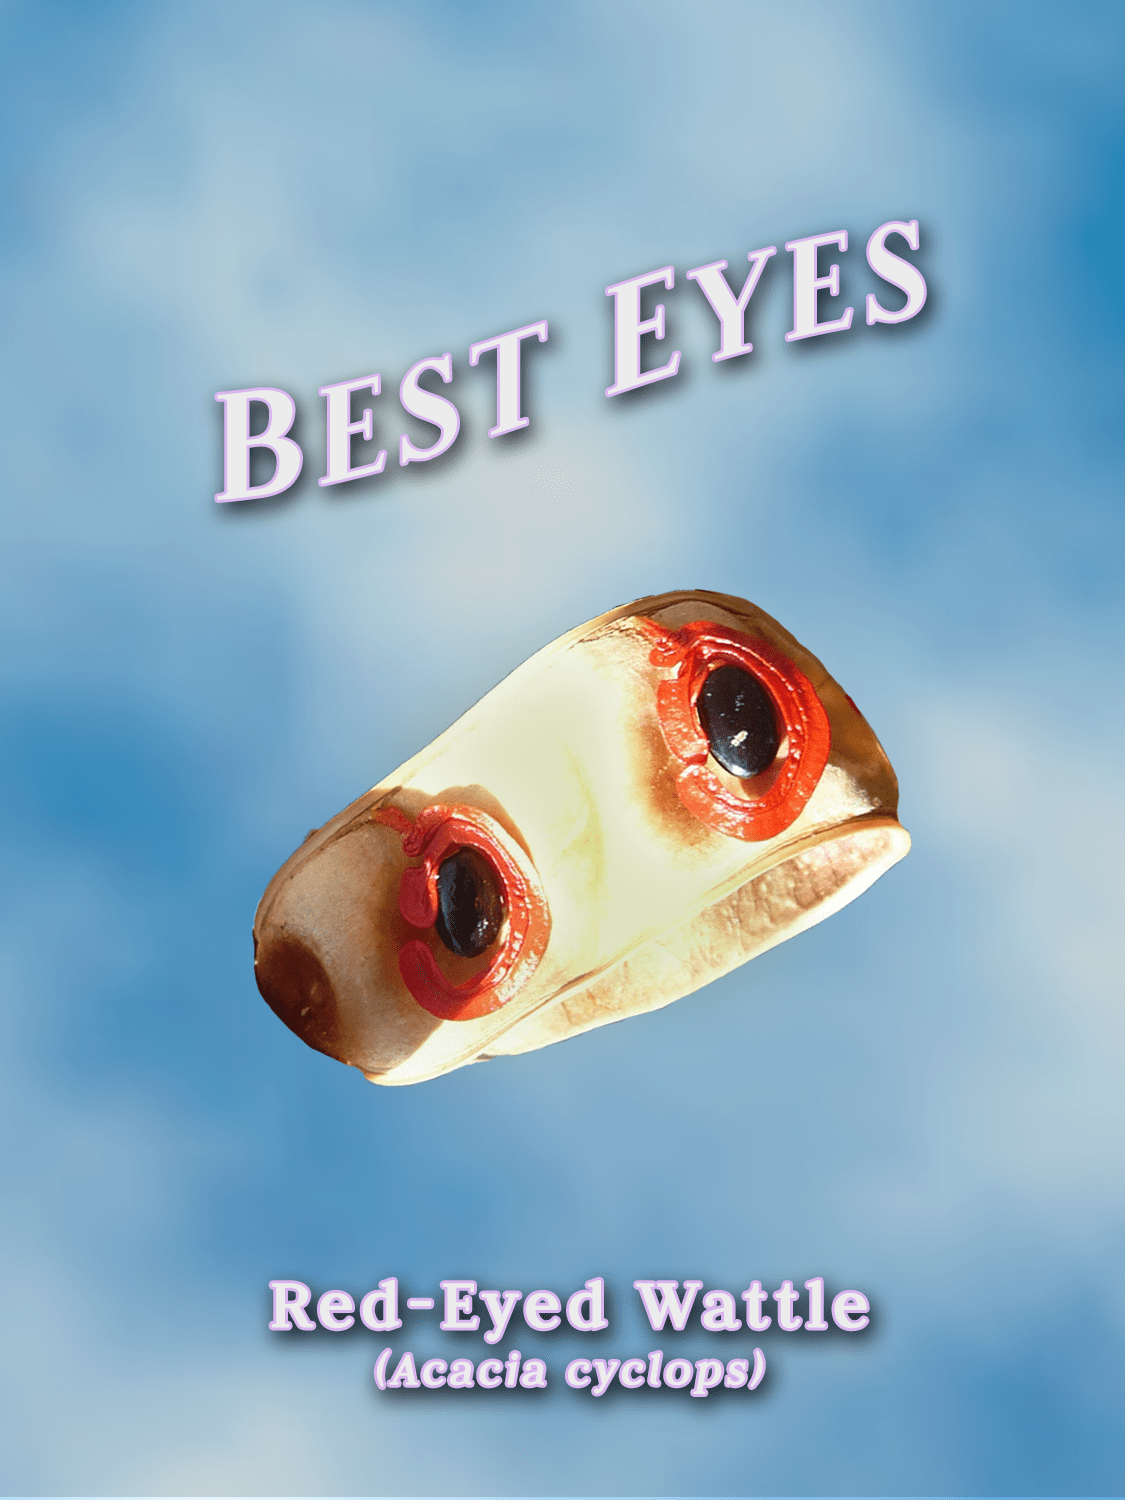 yearbook style portrait of two red eyed wattle seeds in a pod. they are black with a red circle around it